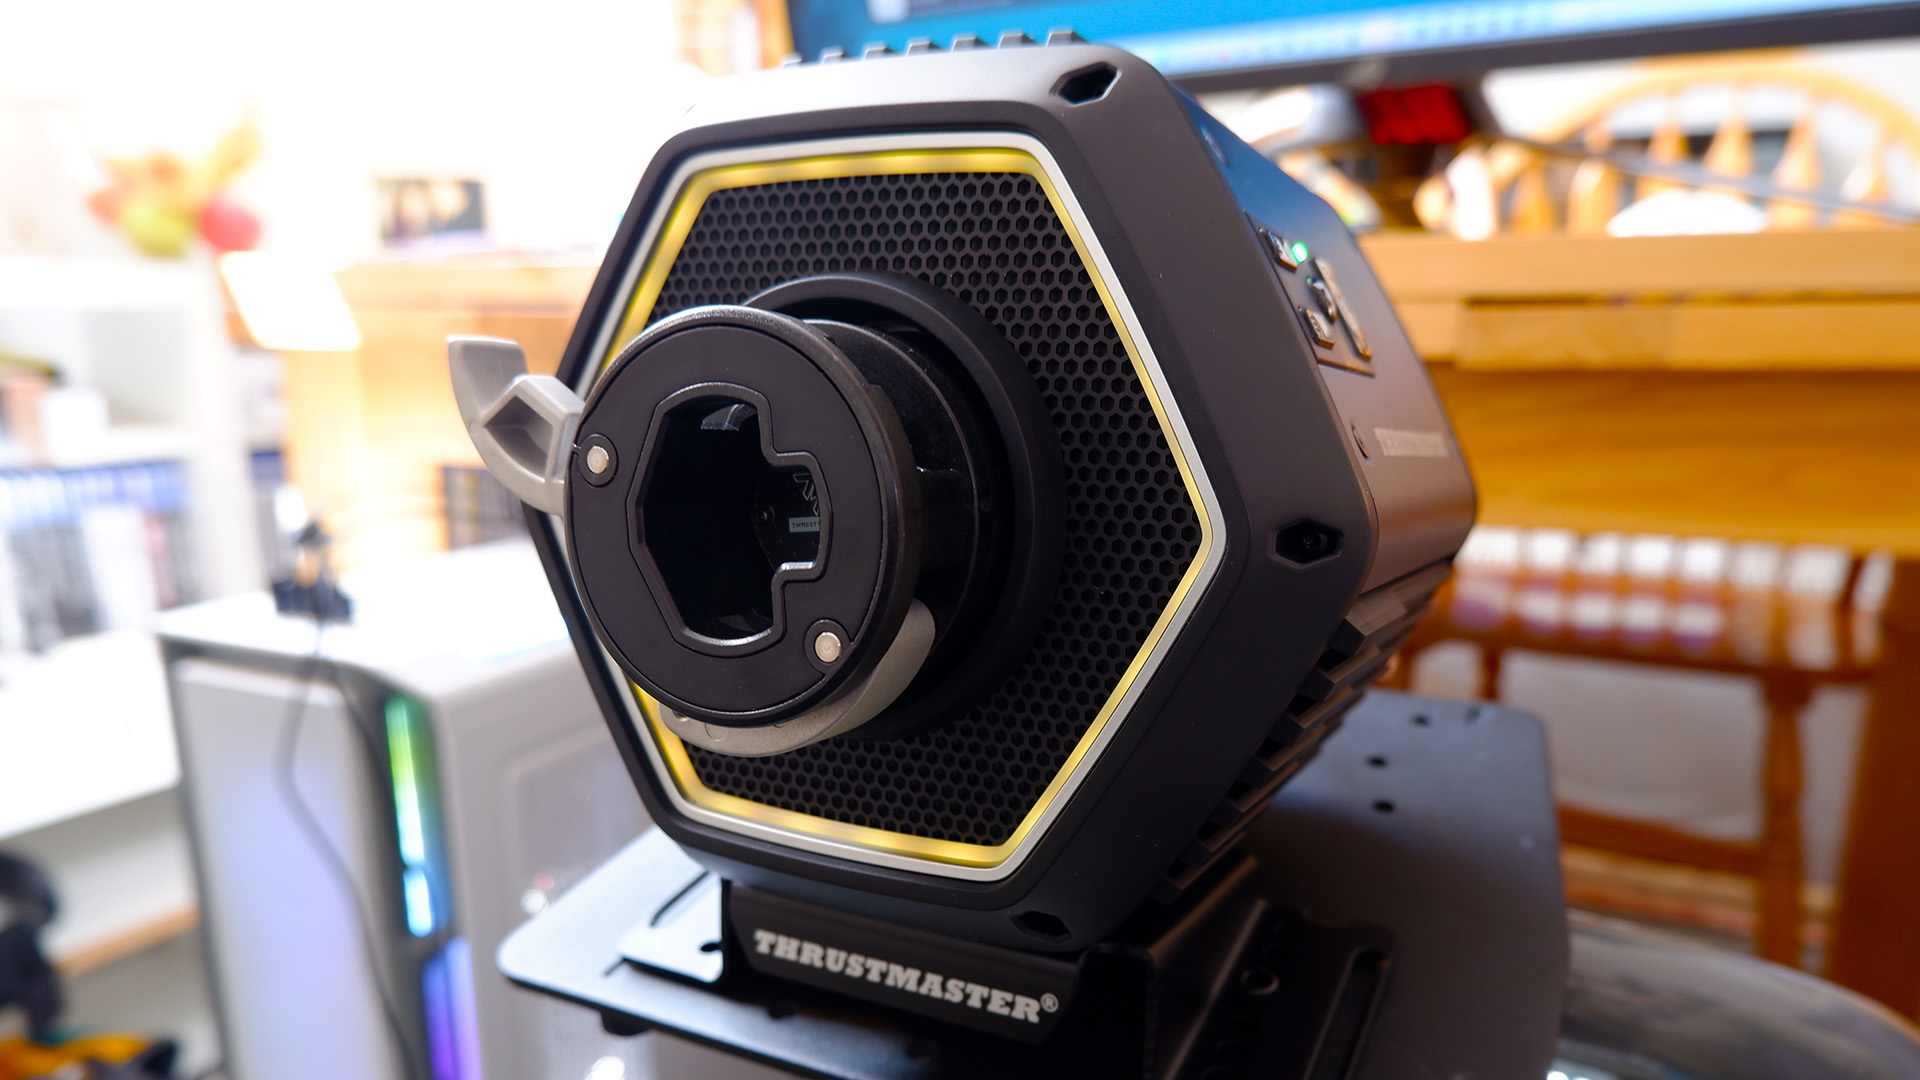 Thrustmaster T818 wheel base review